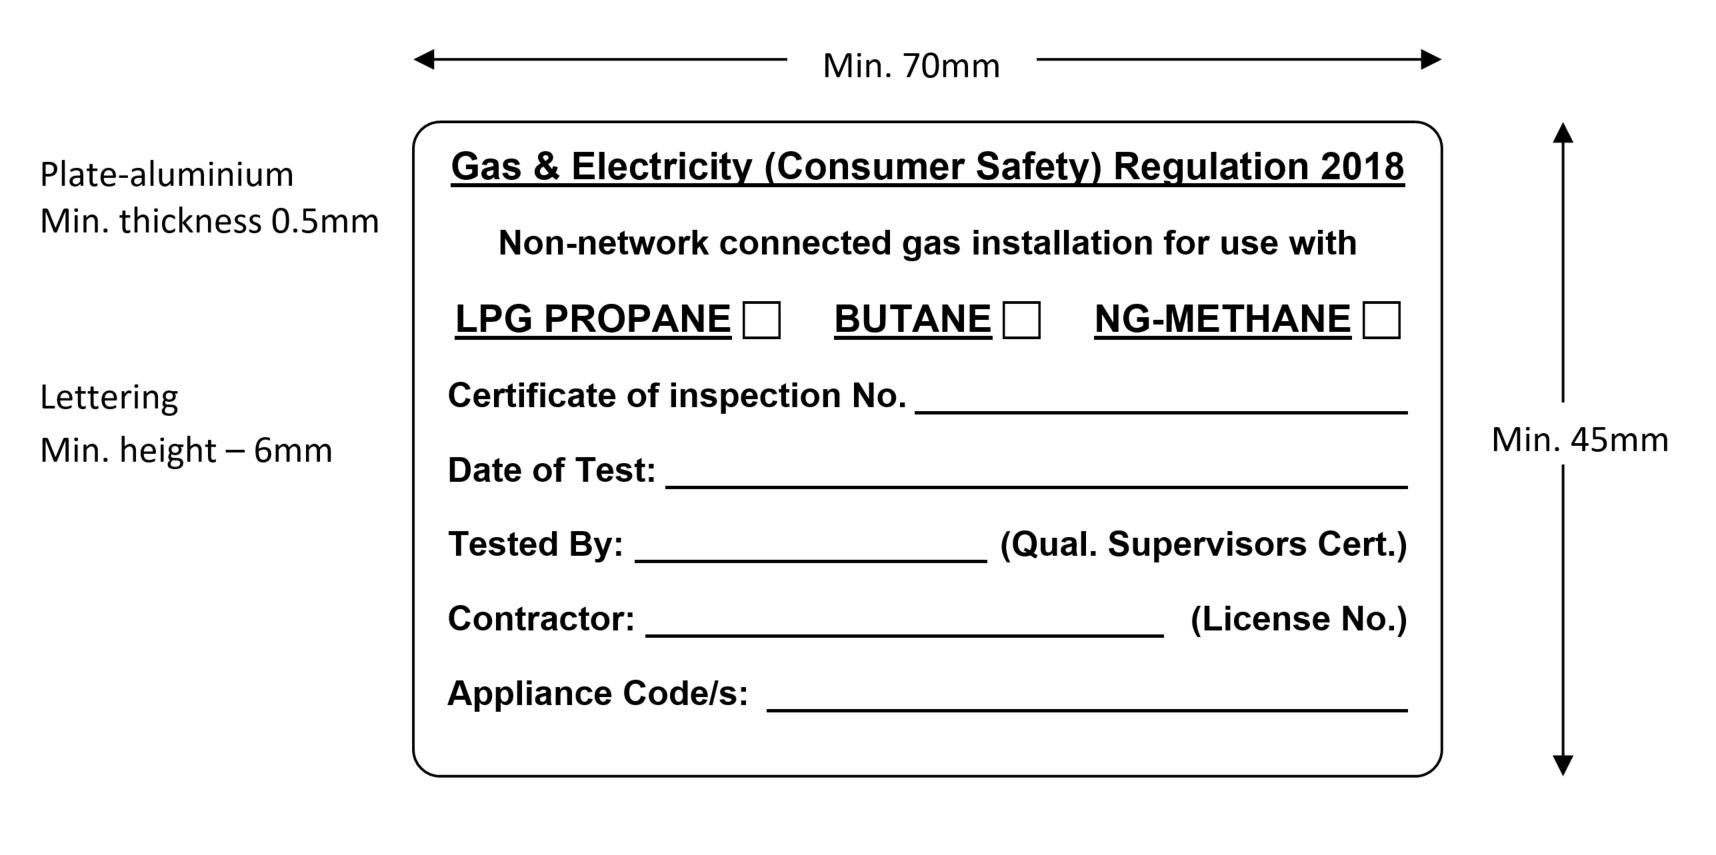 Image example of a gasfitters compliance plate design and dimensions